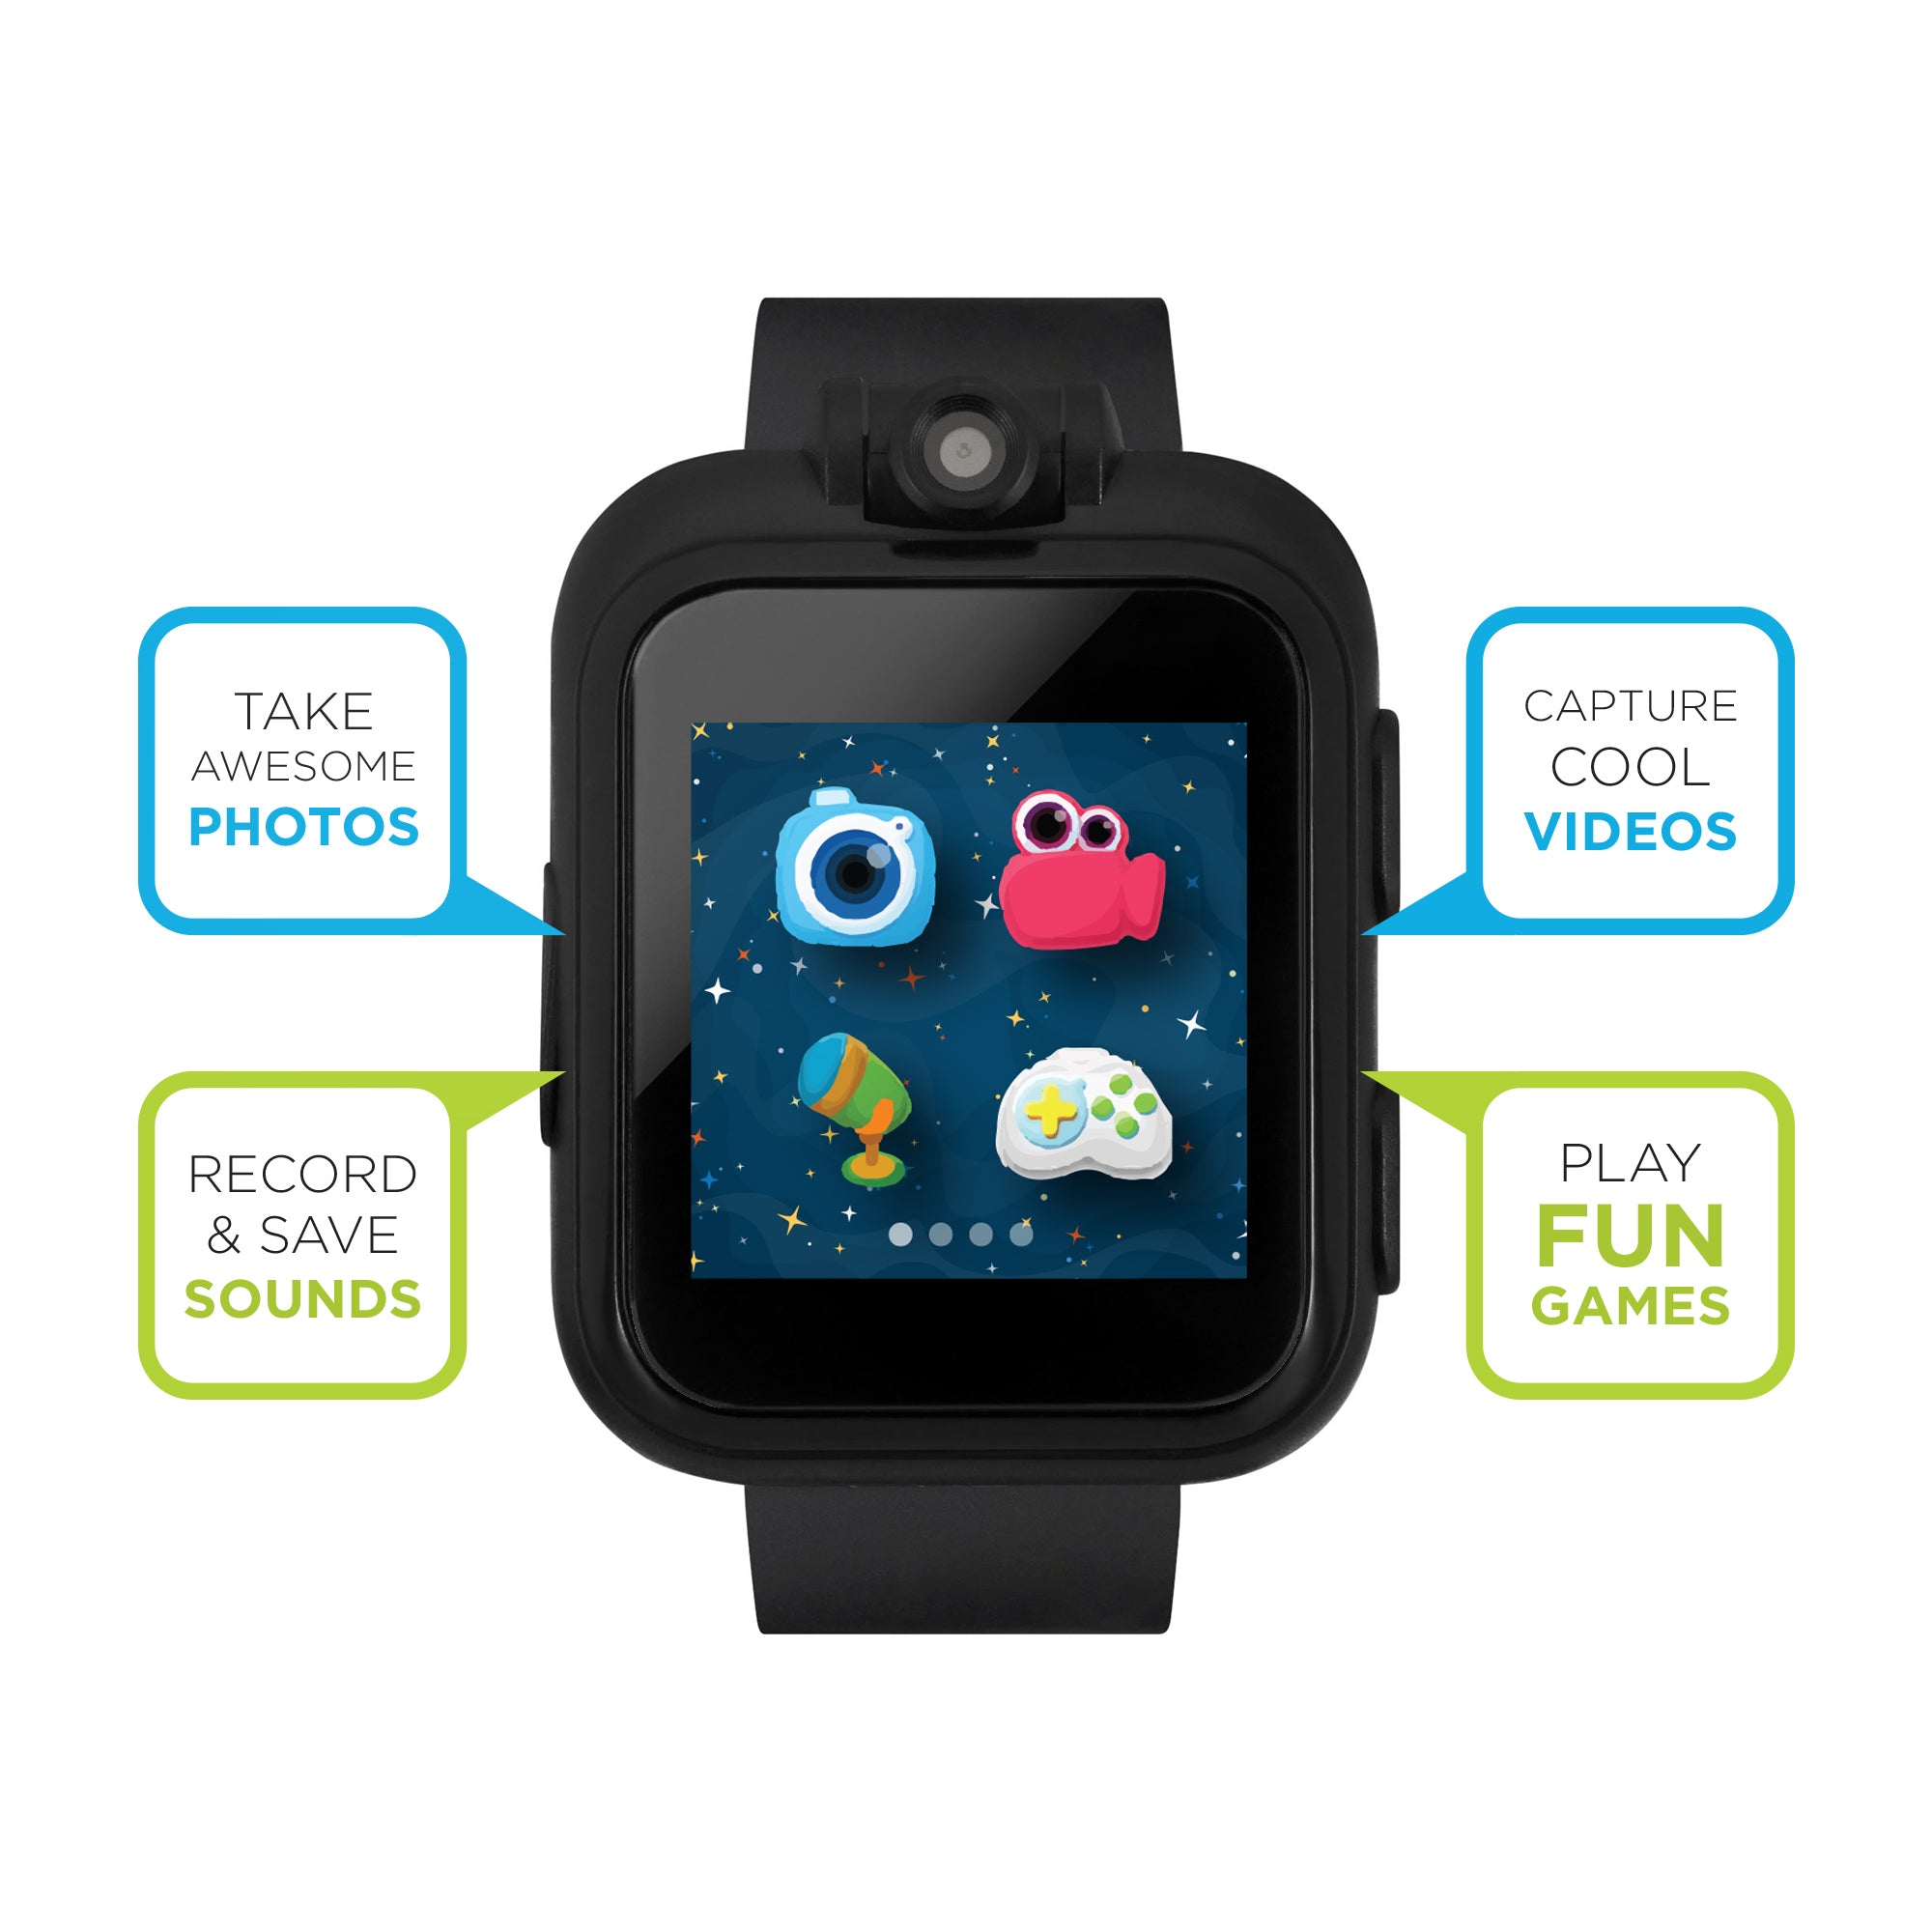 PlayZoom Smartwatch for Kids: Black affordable smart watch